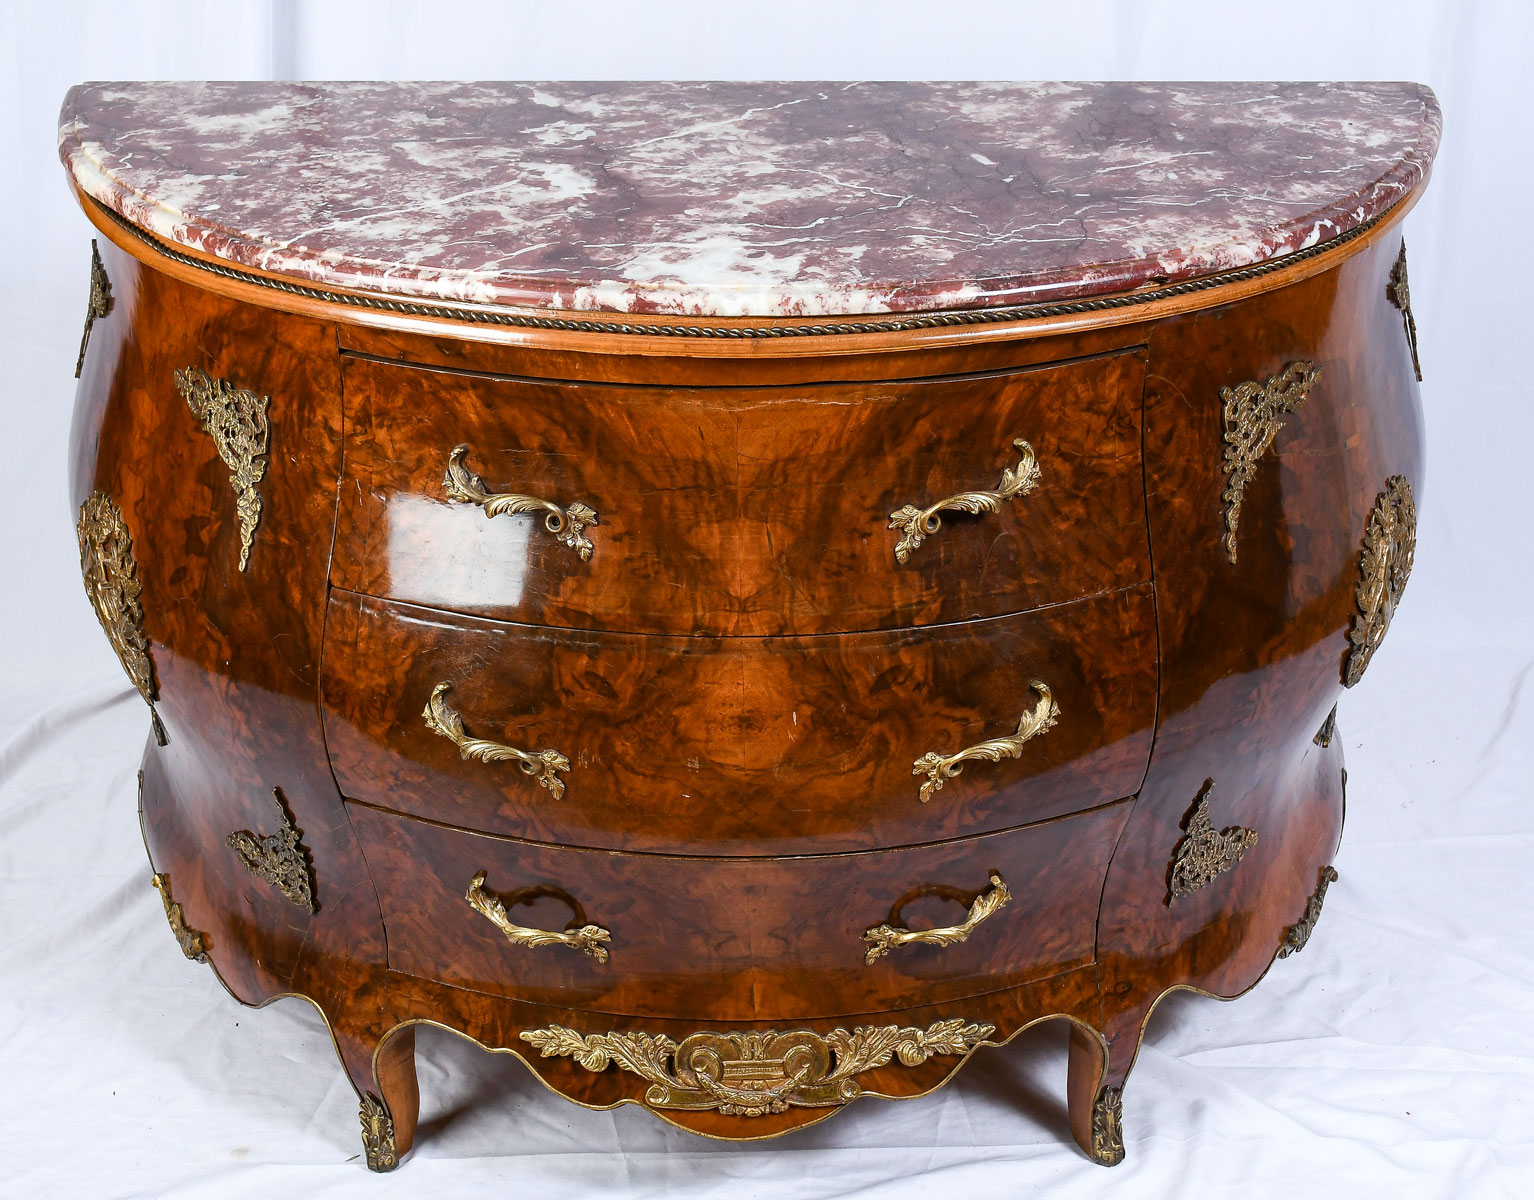 LARGE MARBLE TOP BOMBAY CHEST: